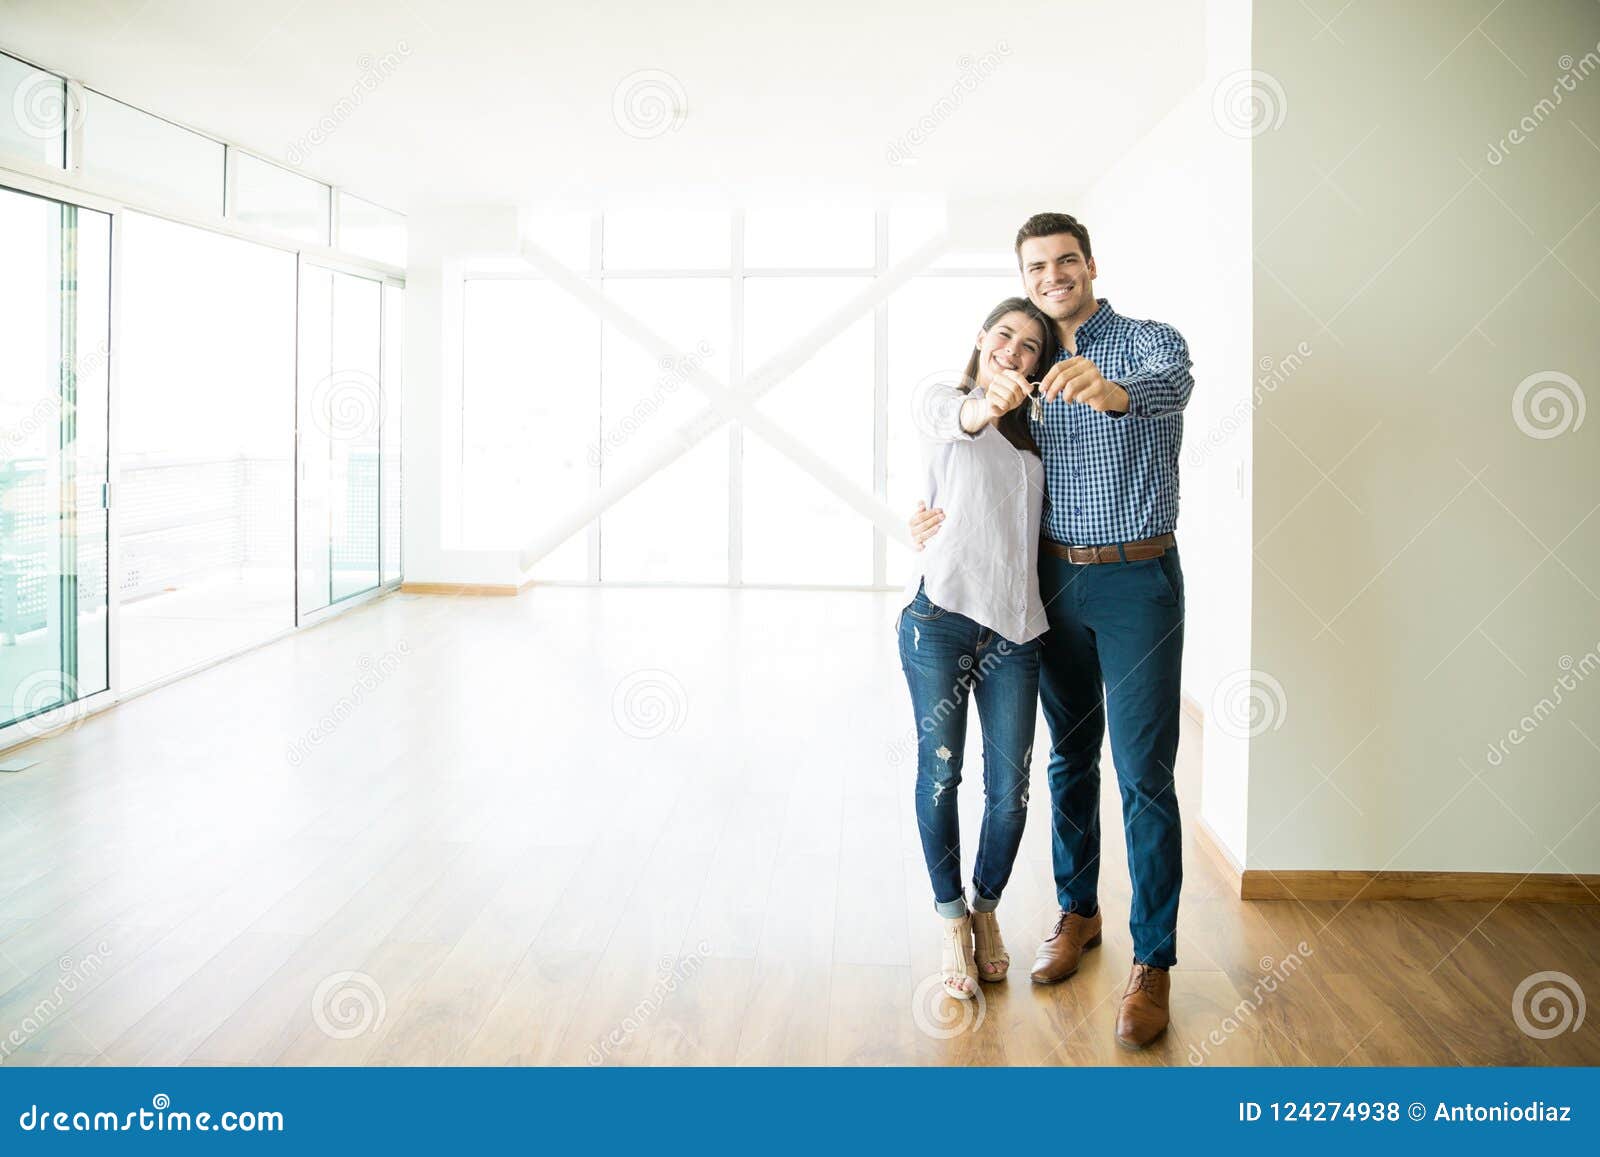 couple feeling happy about buying new house